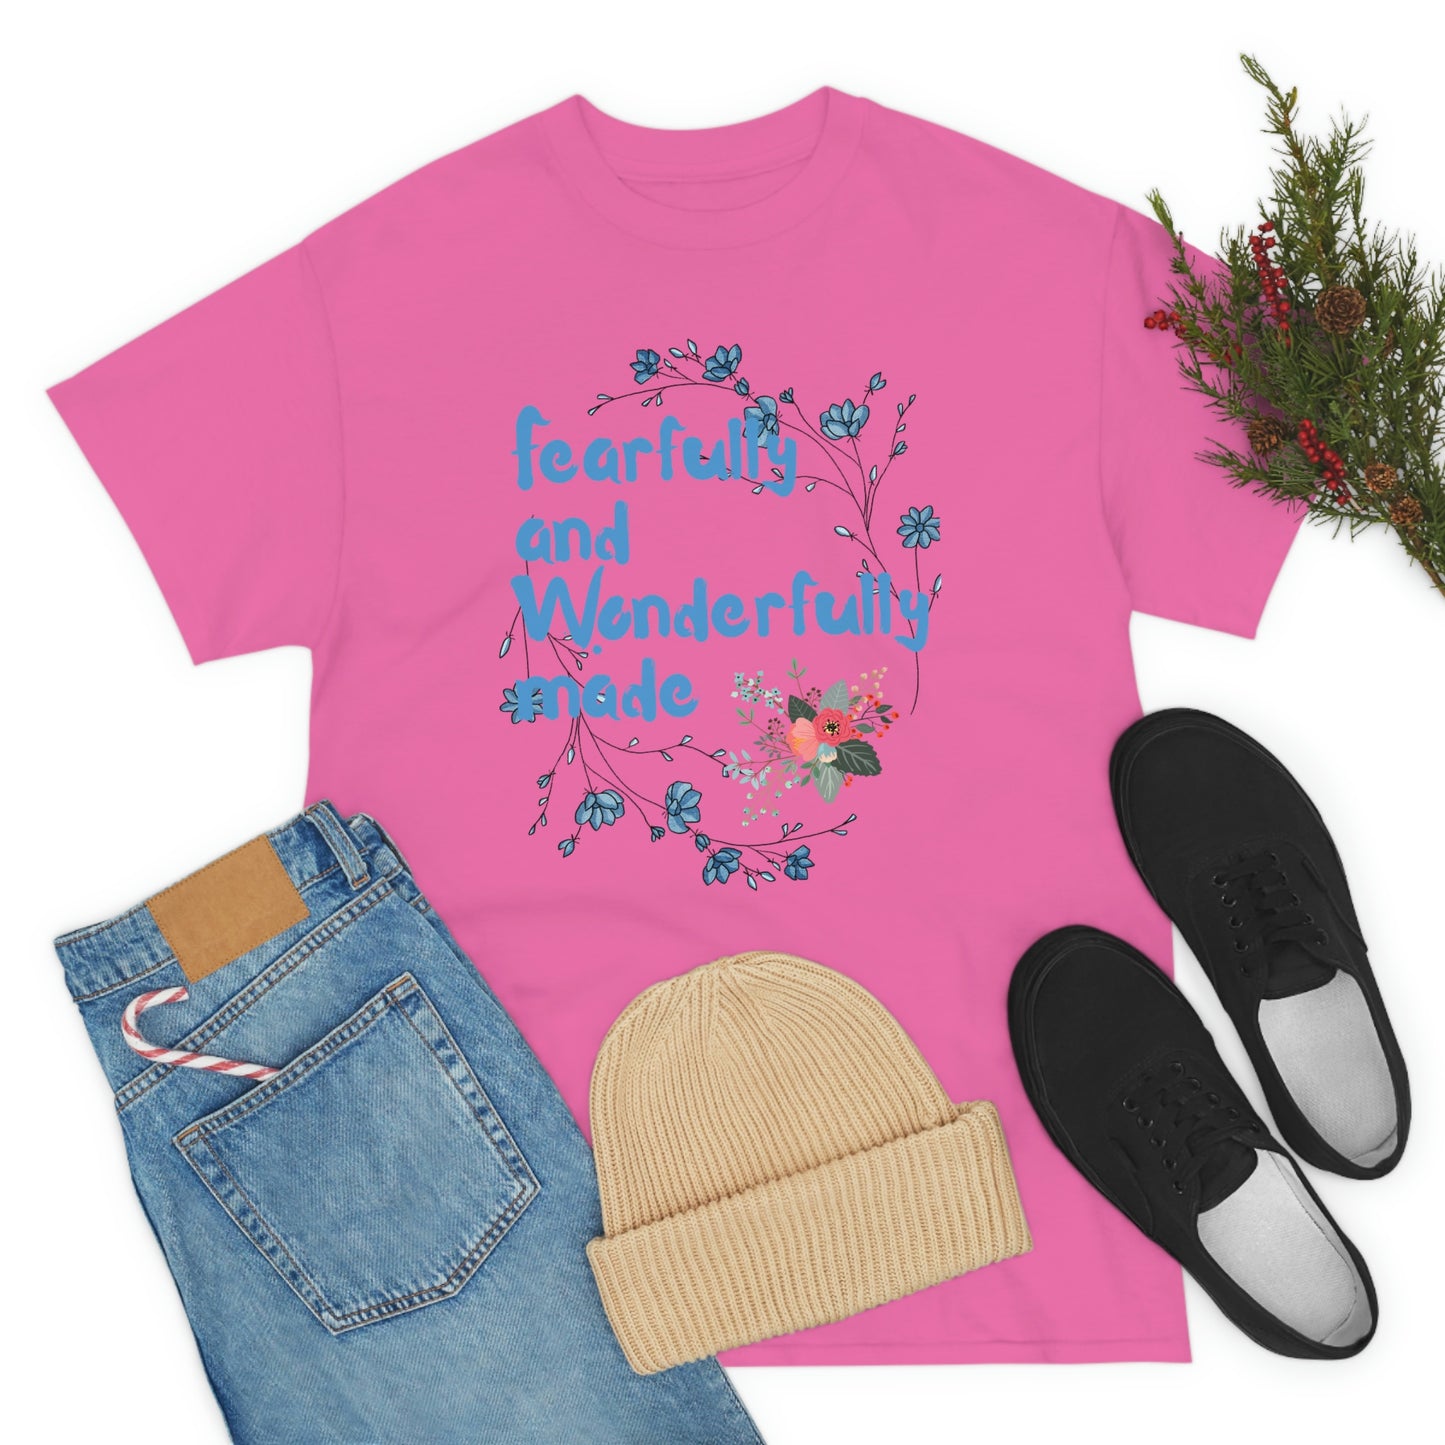 Fearfully and Wonderfully made - Unisex Christian Cotton Tee